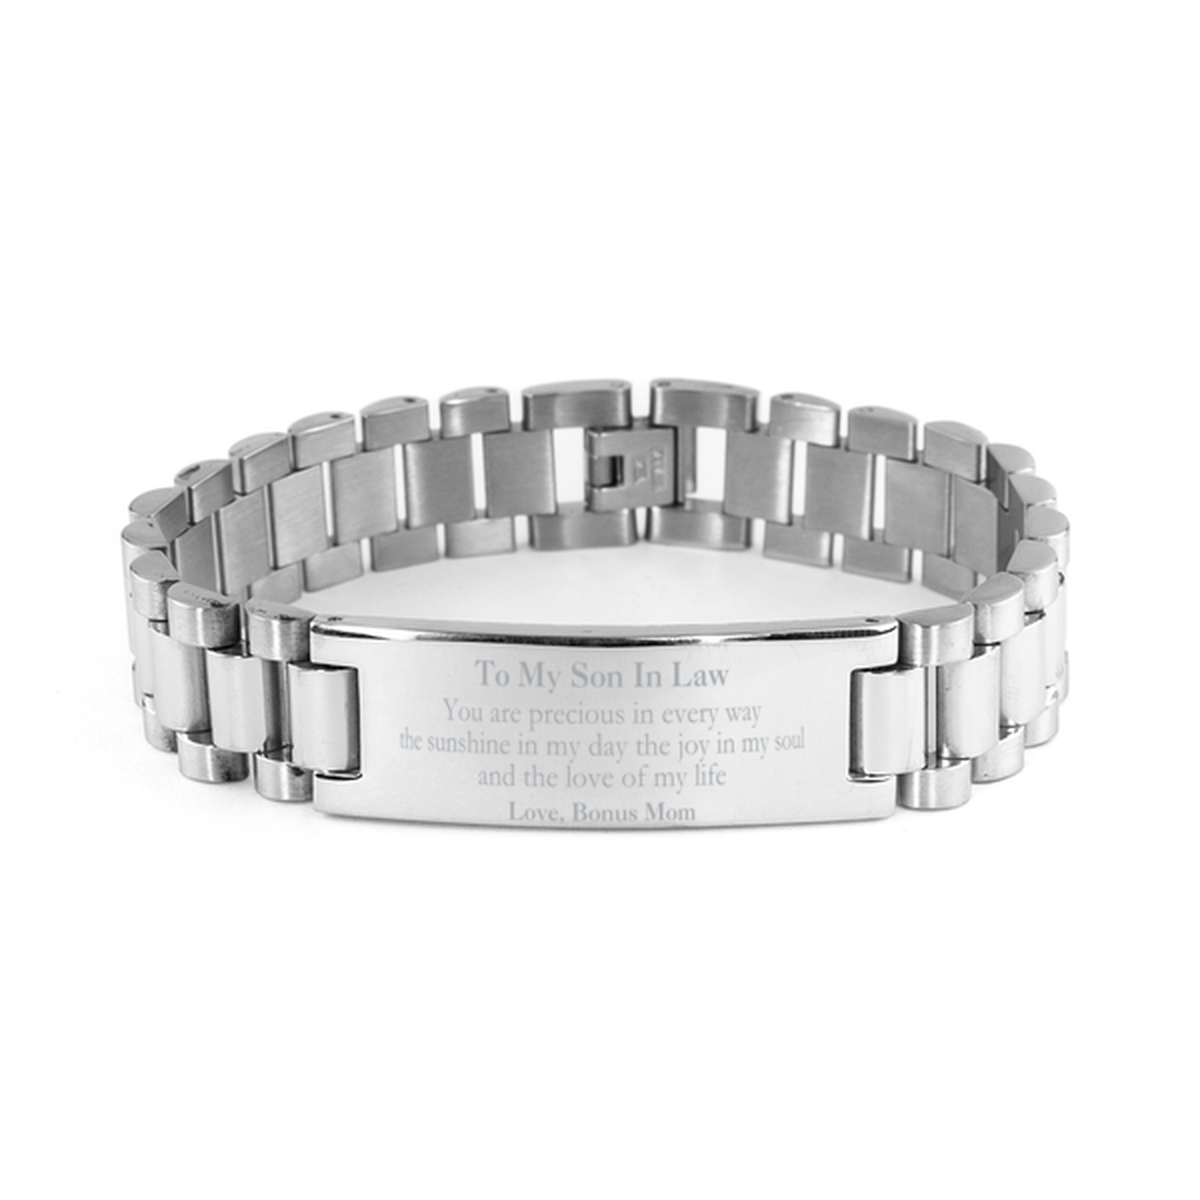 Graduation Gifts for Son In Law Ladder Stainless Steel Bracelet Present from Bonus Mom, Christmas Son In Law Birthday Gifts Son In Law You are precious in every way the sunshine in my day. Love, Bonus Mom